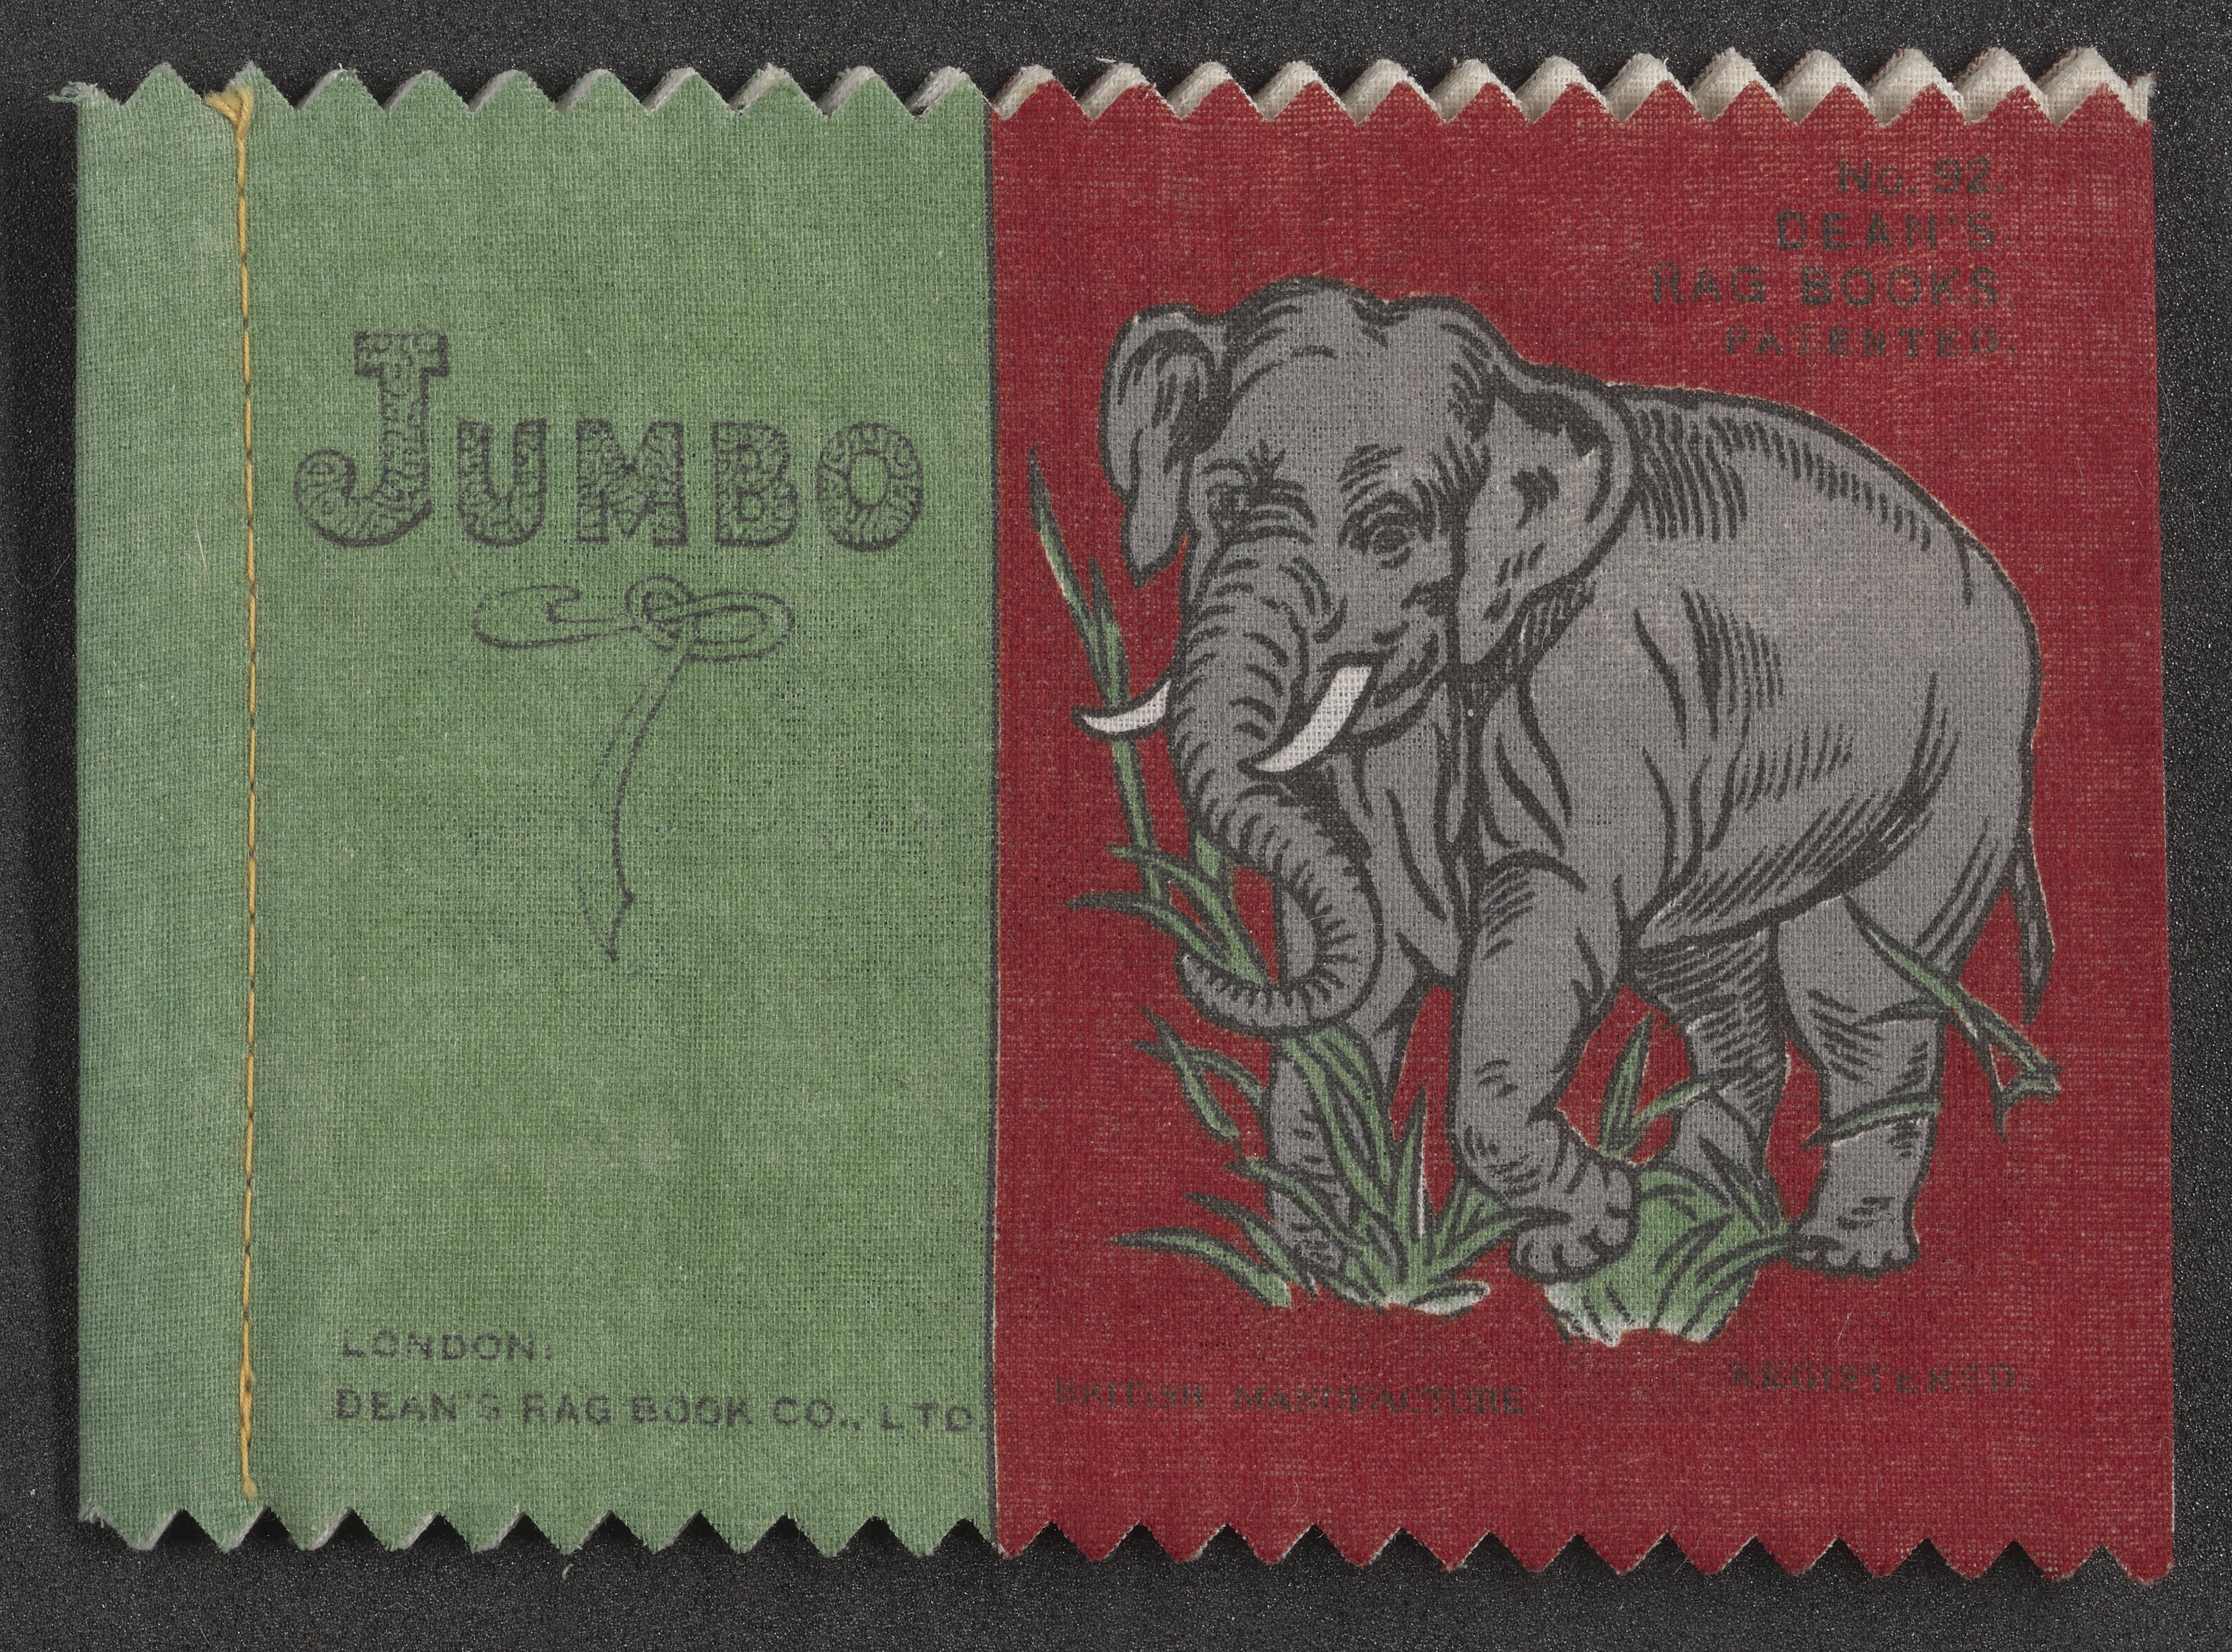 The cover of a book with cloth pages, it's red and green with an image of an elephant.